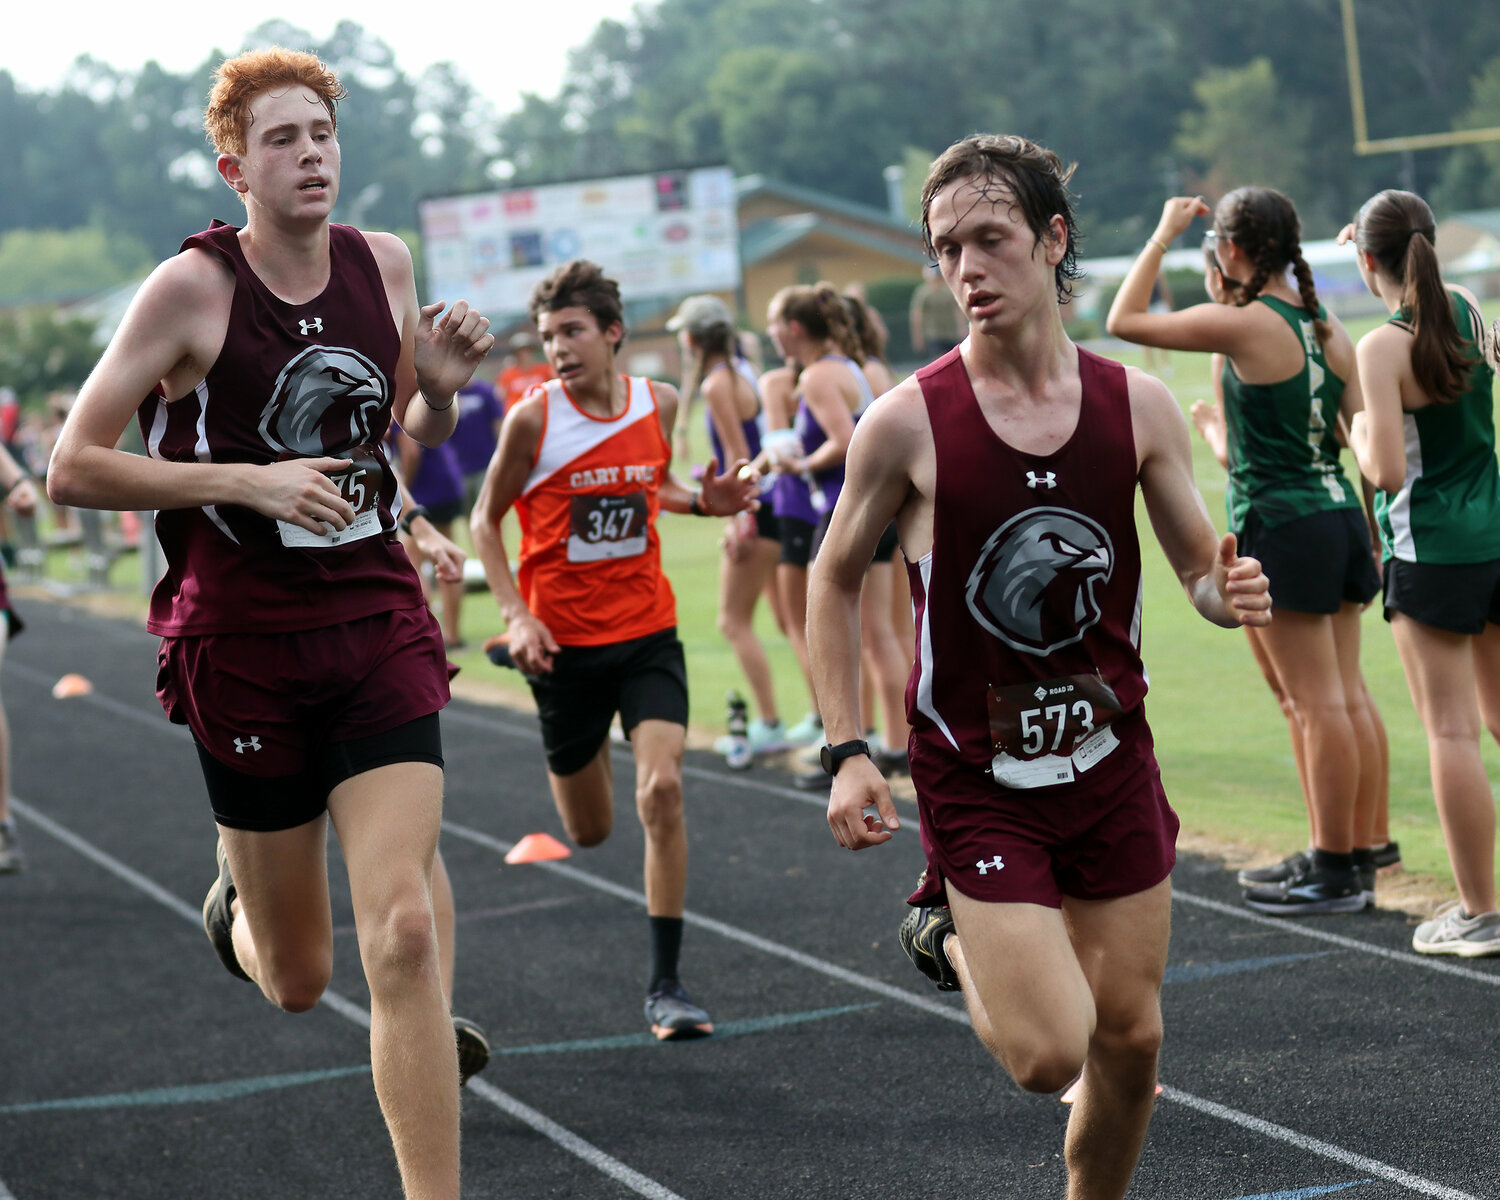 Seaforth's Jack Anstrom (wearing 573) runs to the finish line.